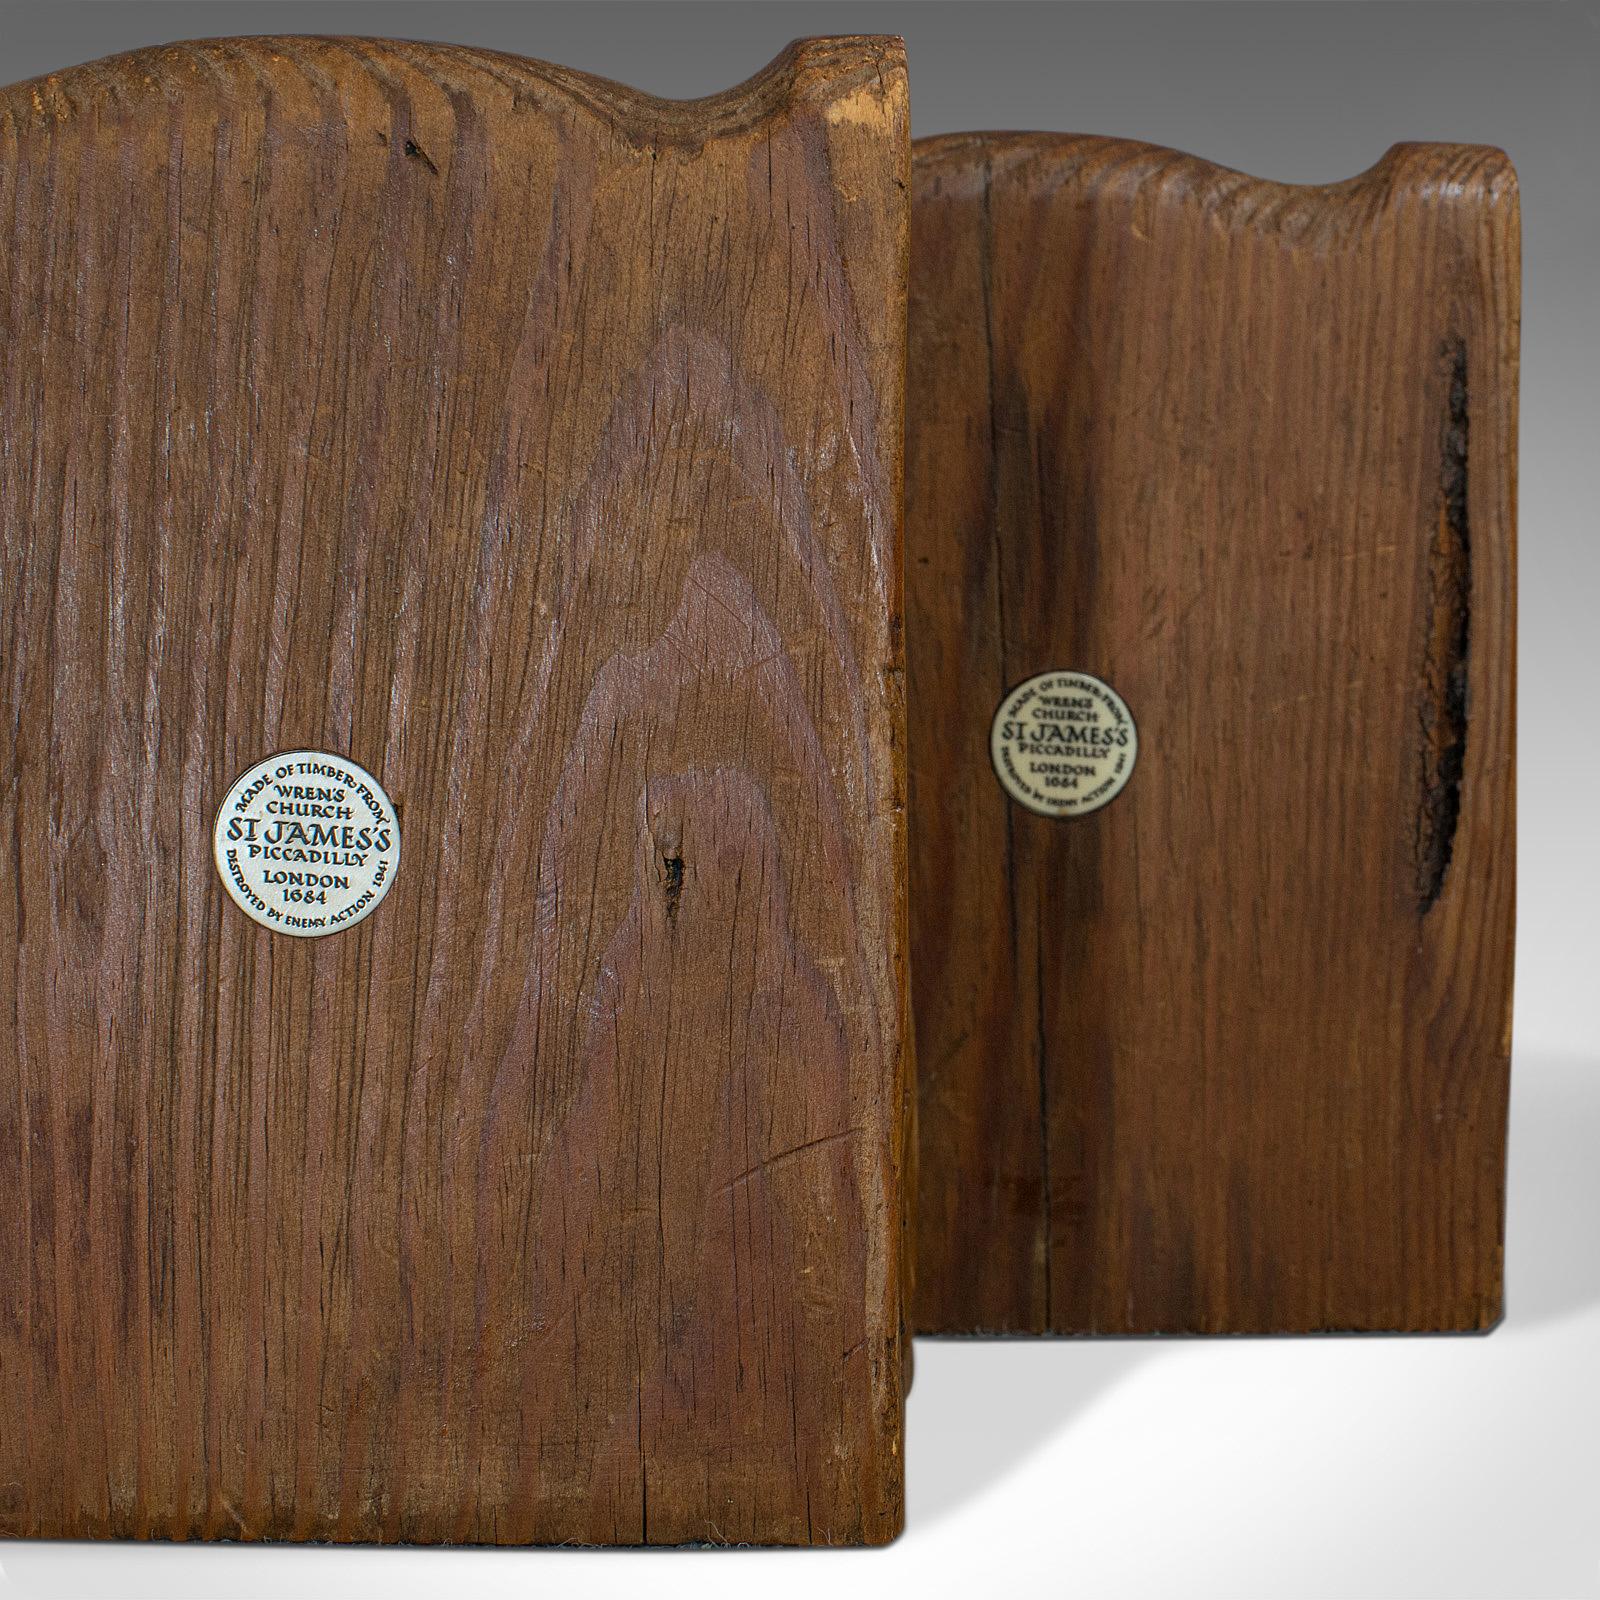 Pair of, Vintage Bookends, English, Pitch Pine, Corbel, Wren's Church, London 5